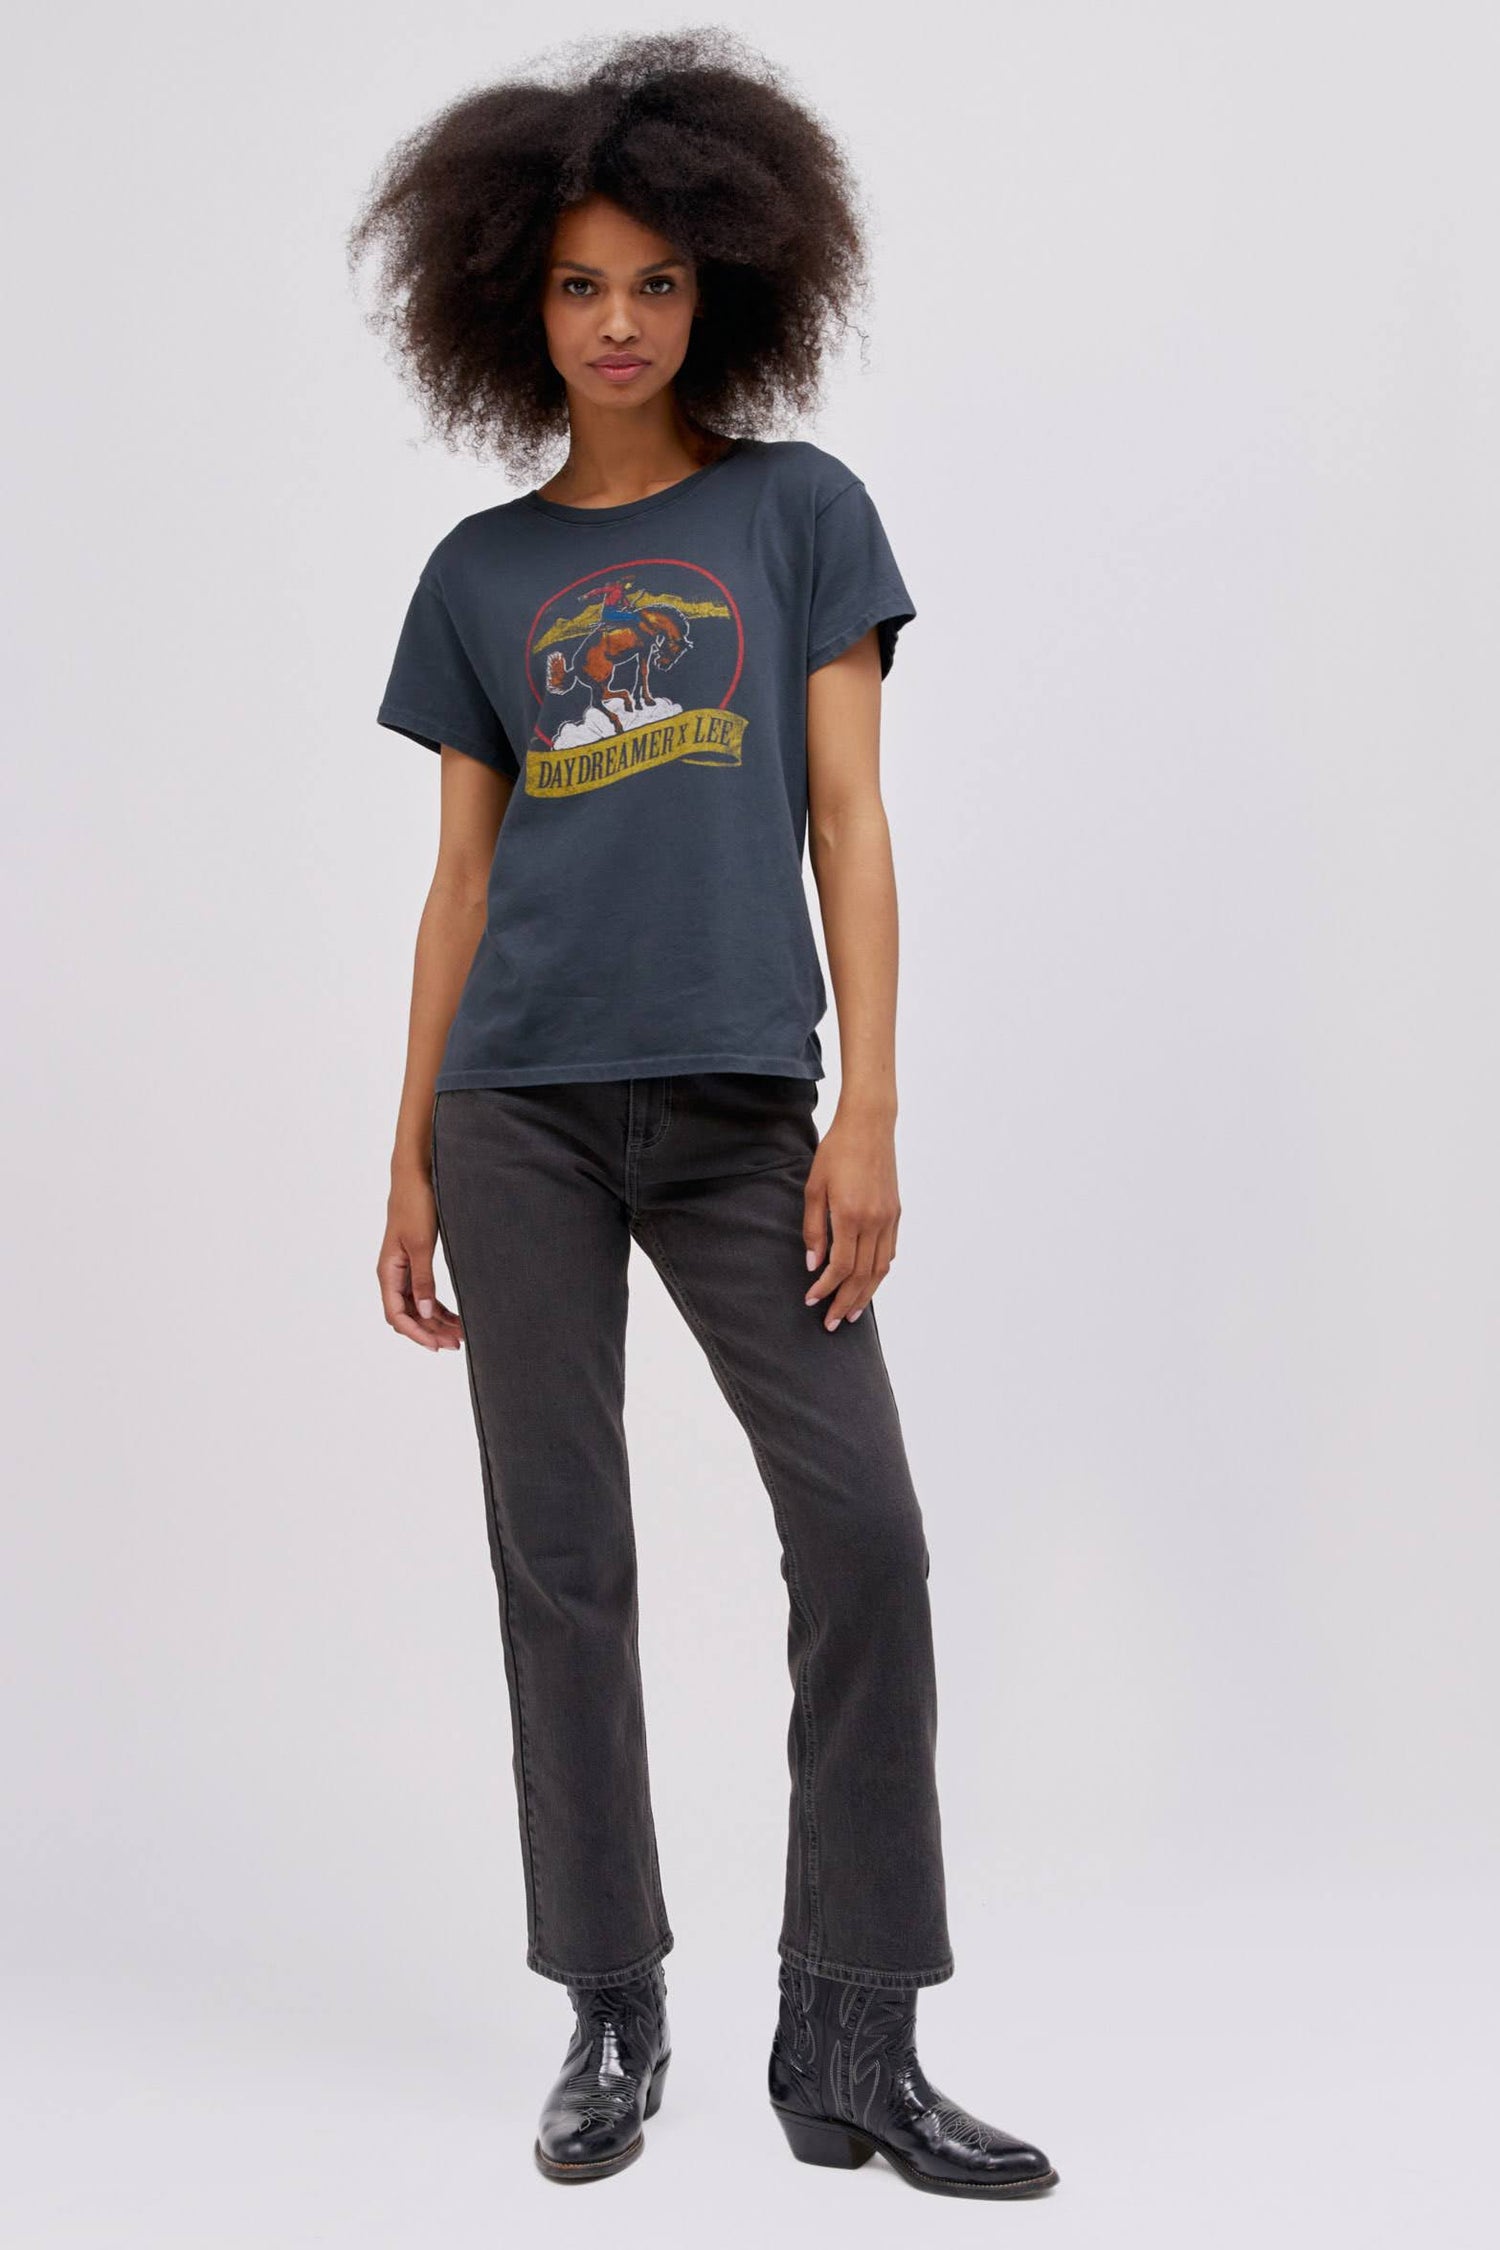 A curly-haired model featuring a black tour tee designed with a fresh rendition of a tried and true Lee vintage rodeo graphic hits a relaxed fit, Tour Tee.